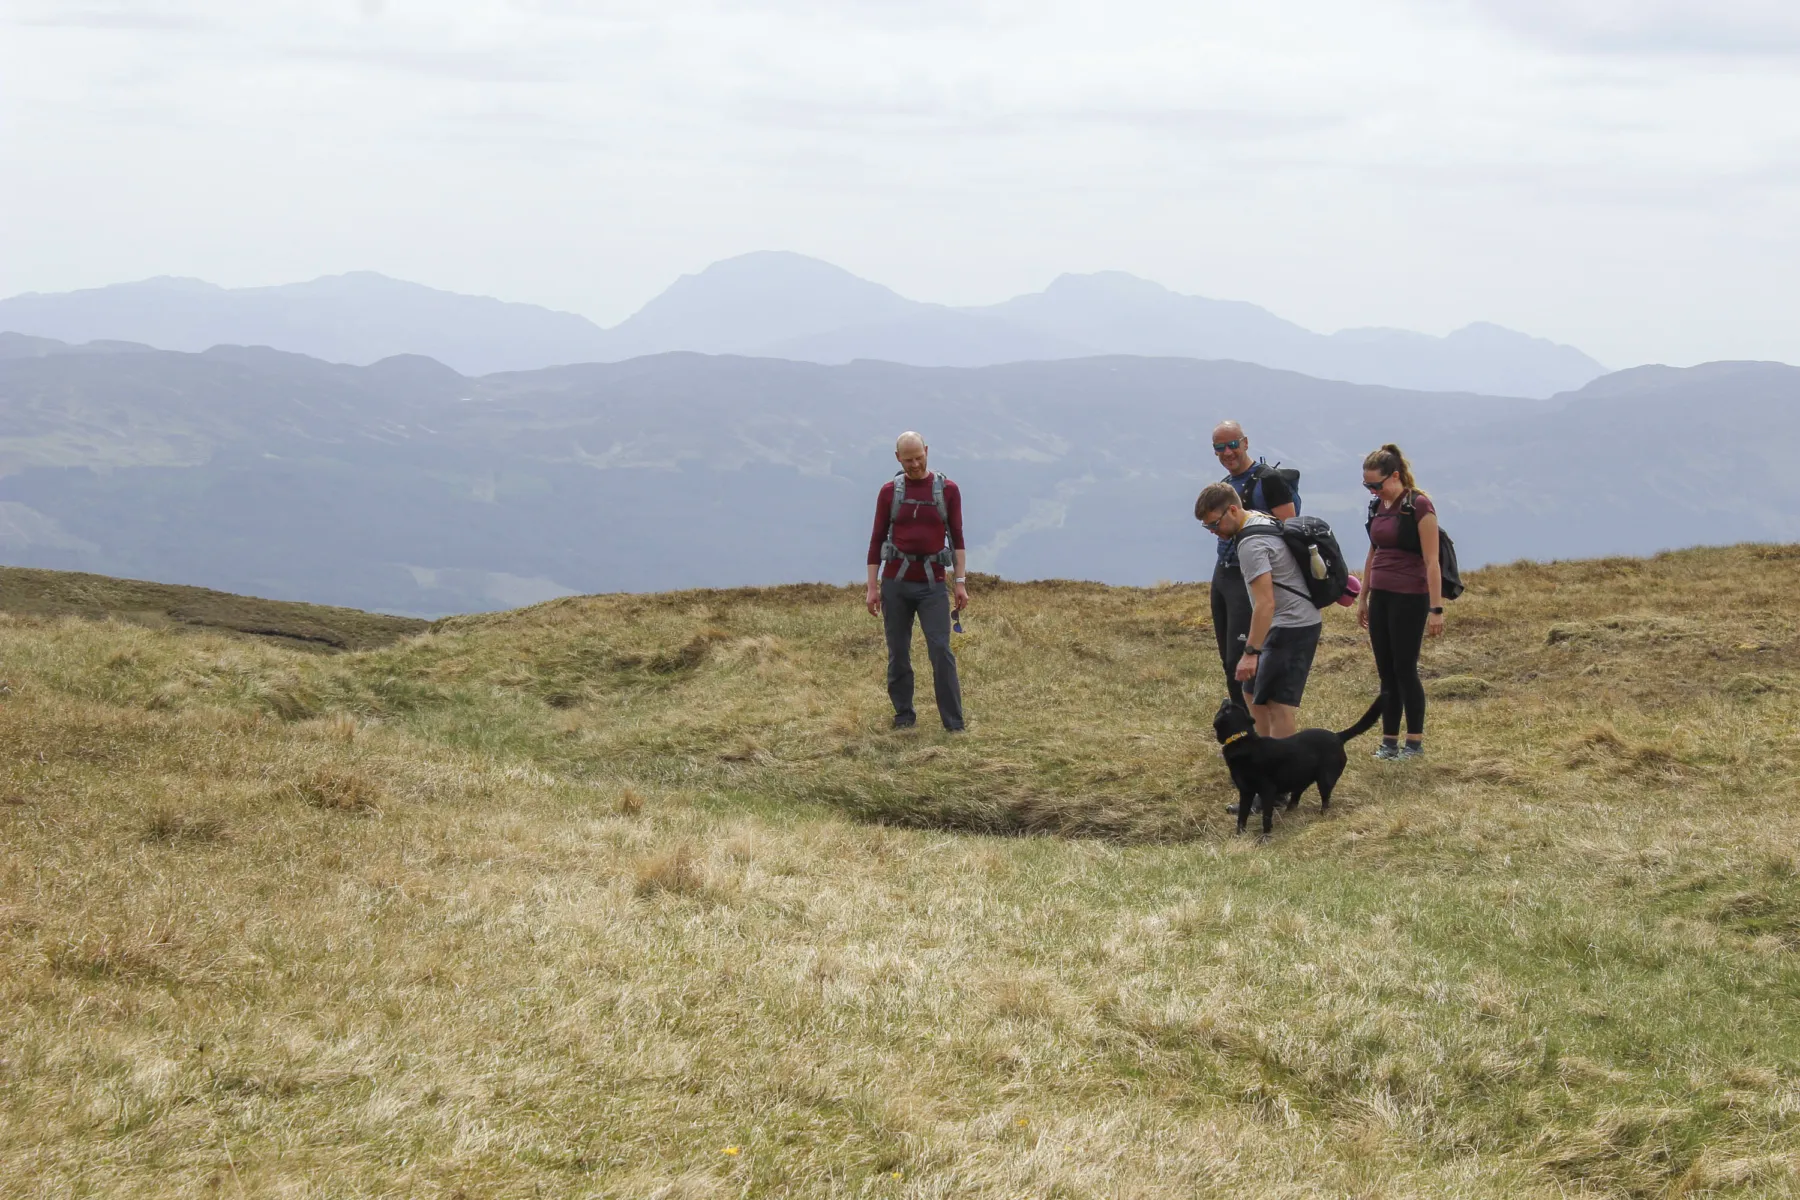 Thomson Gray members of the team out on a hillwalking day in Scotland. Three men and a woman, with a black labrador dog, are high up with views to hills behind.